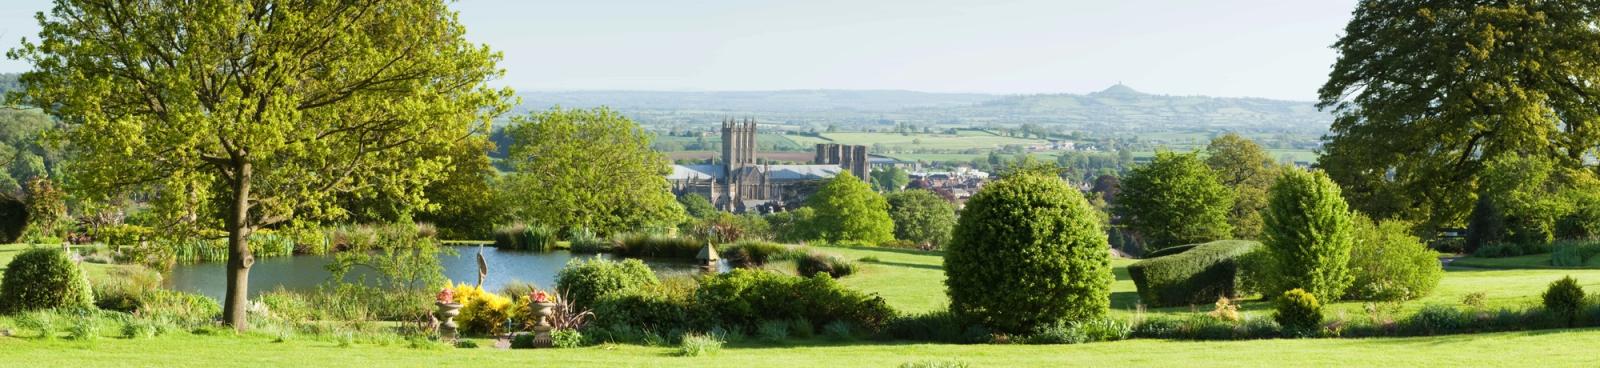 Hotels in the West Country